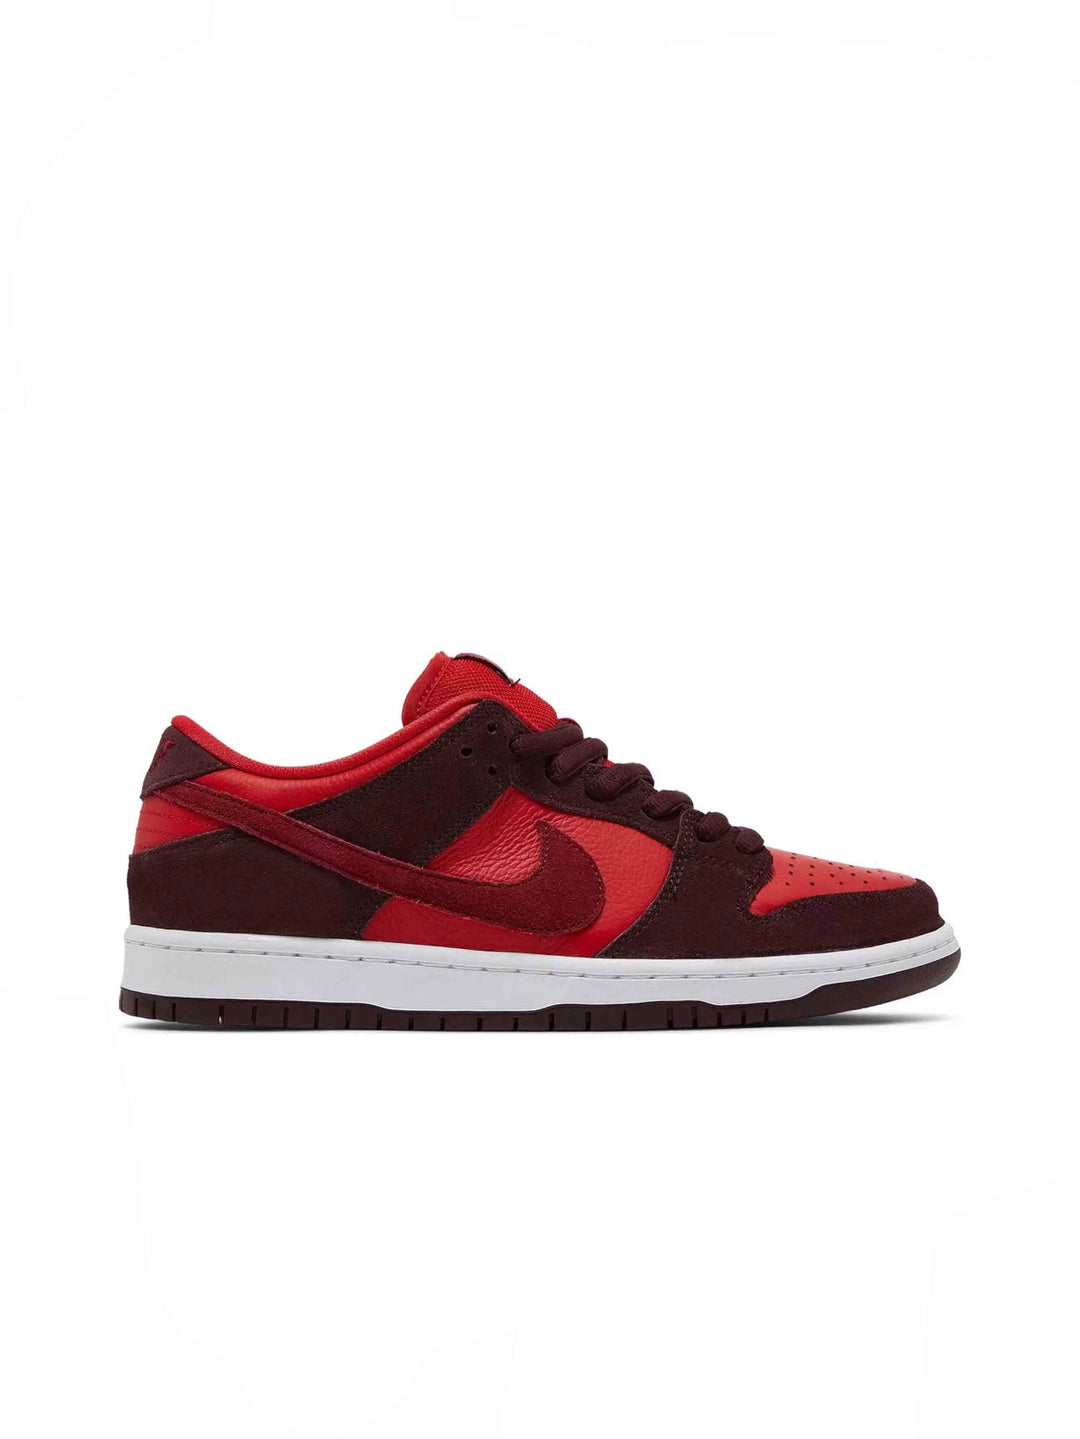 Nike SB Dunk Low Cherry in Auckland, New Zealand - Shop name